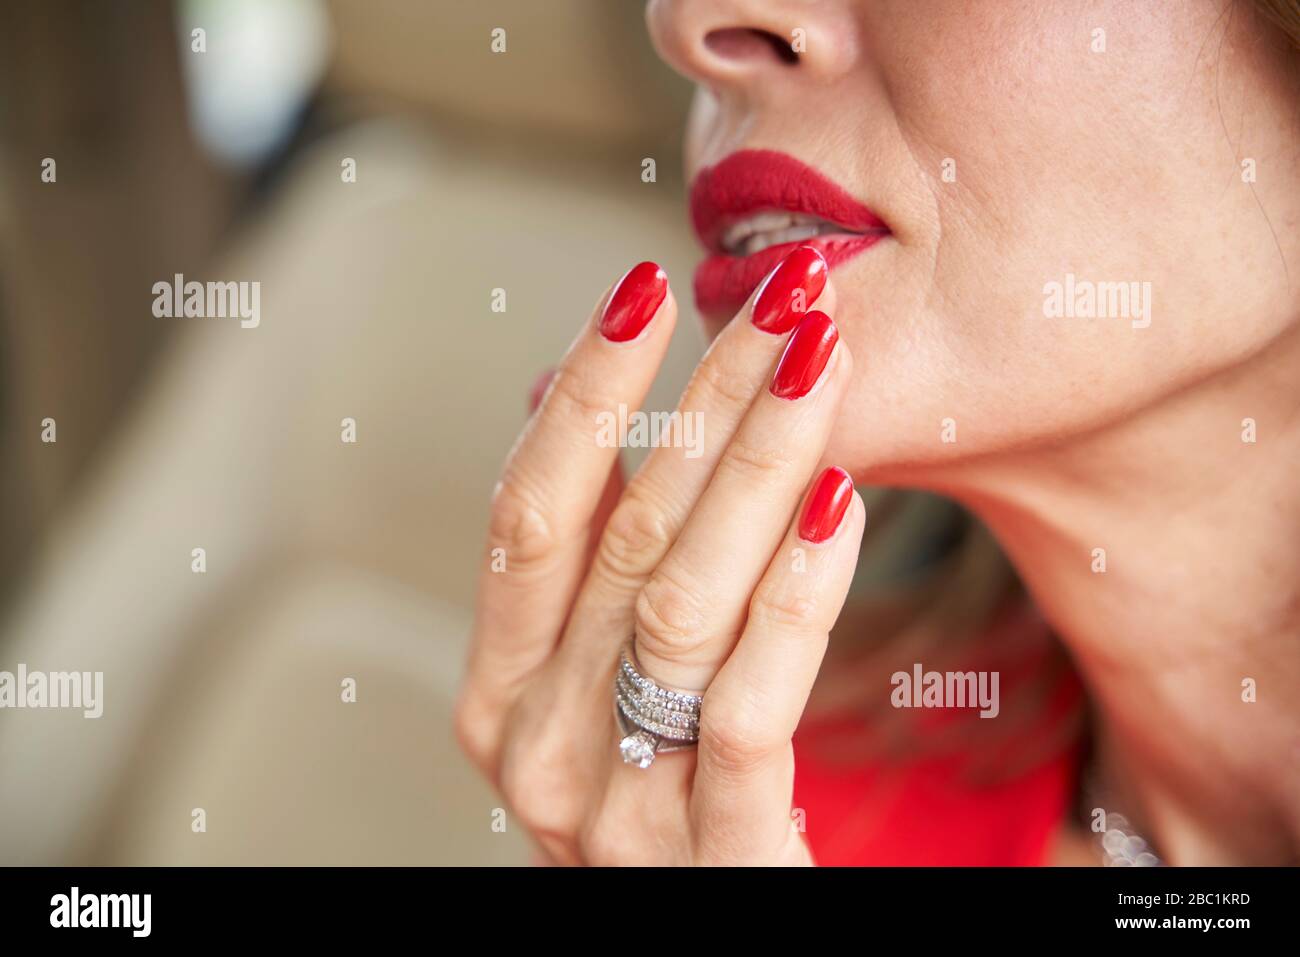 Crop view of mature woman with red lips and nails Stock Photo